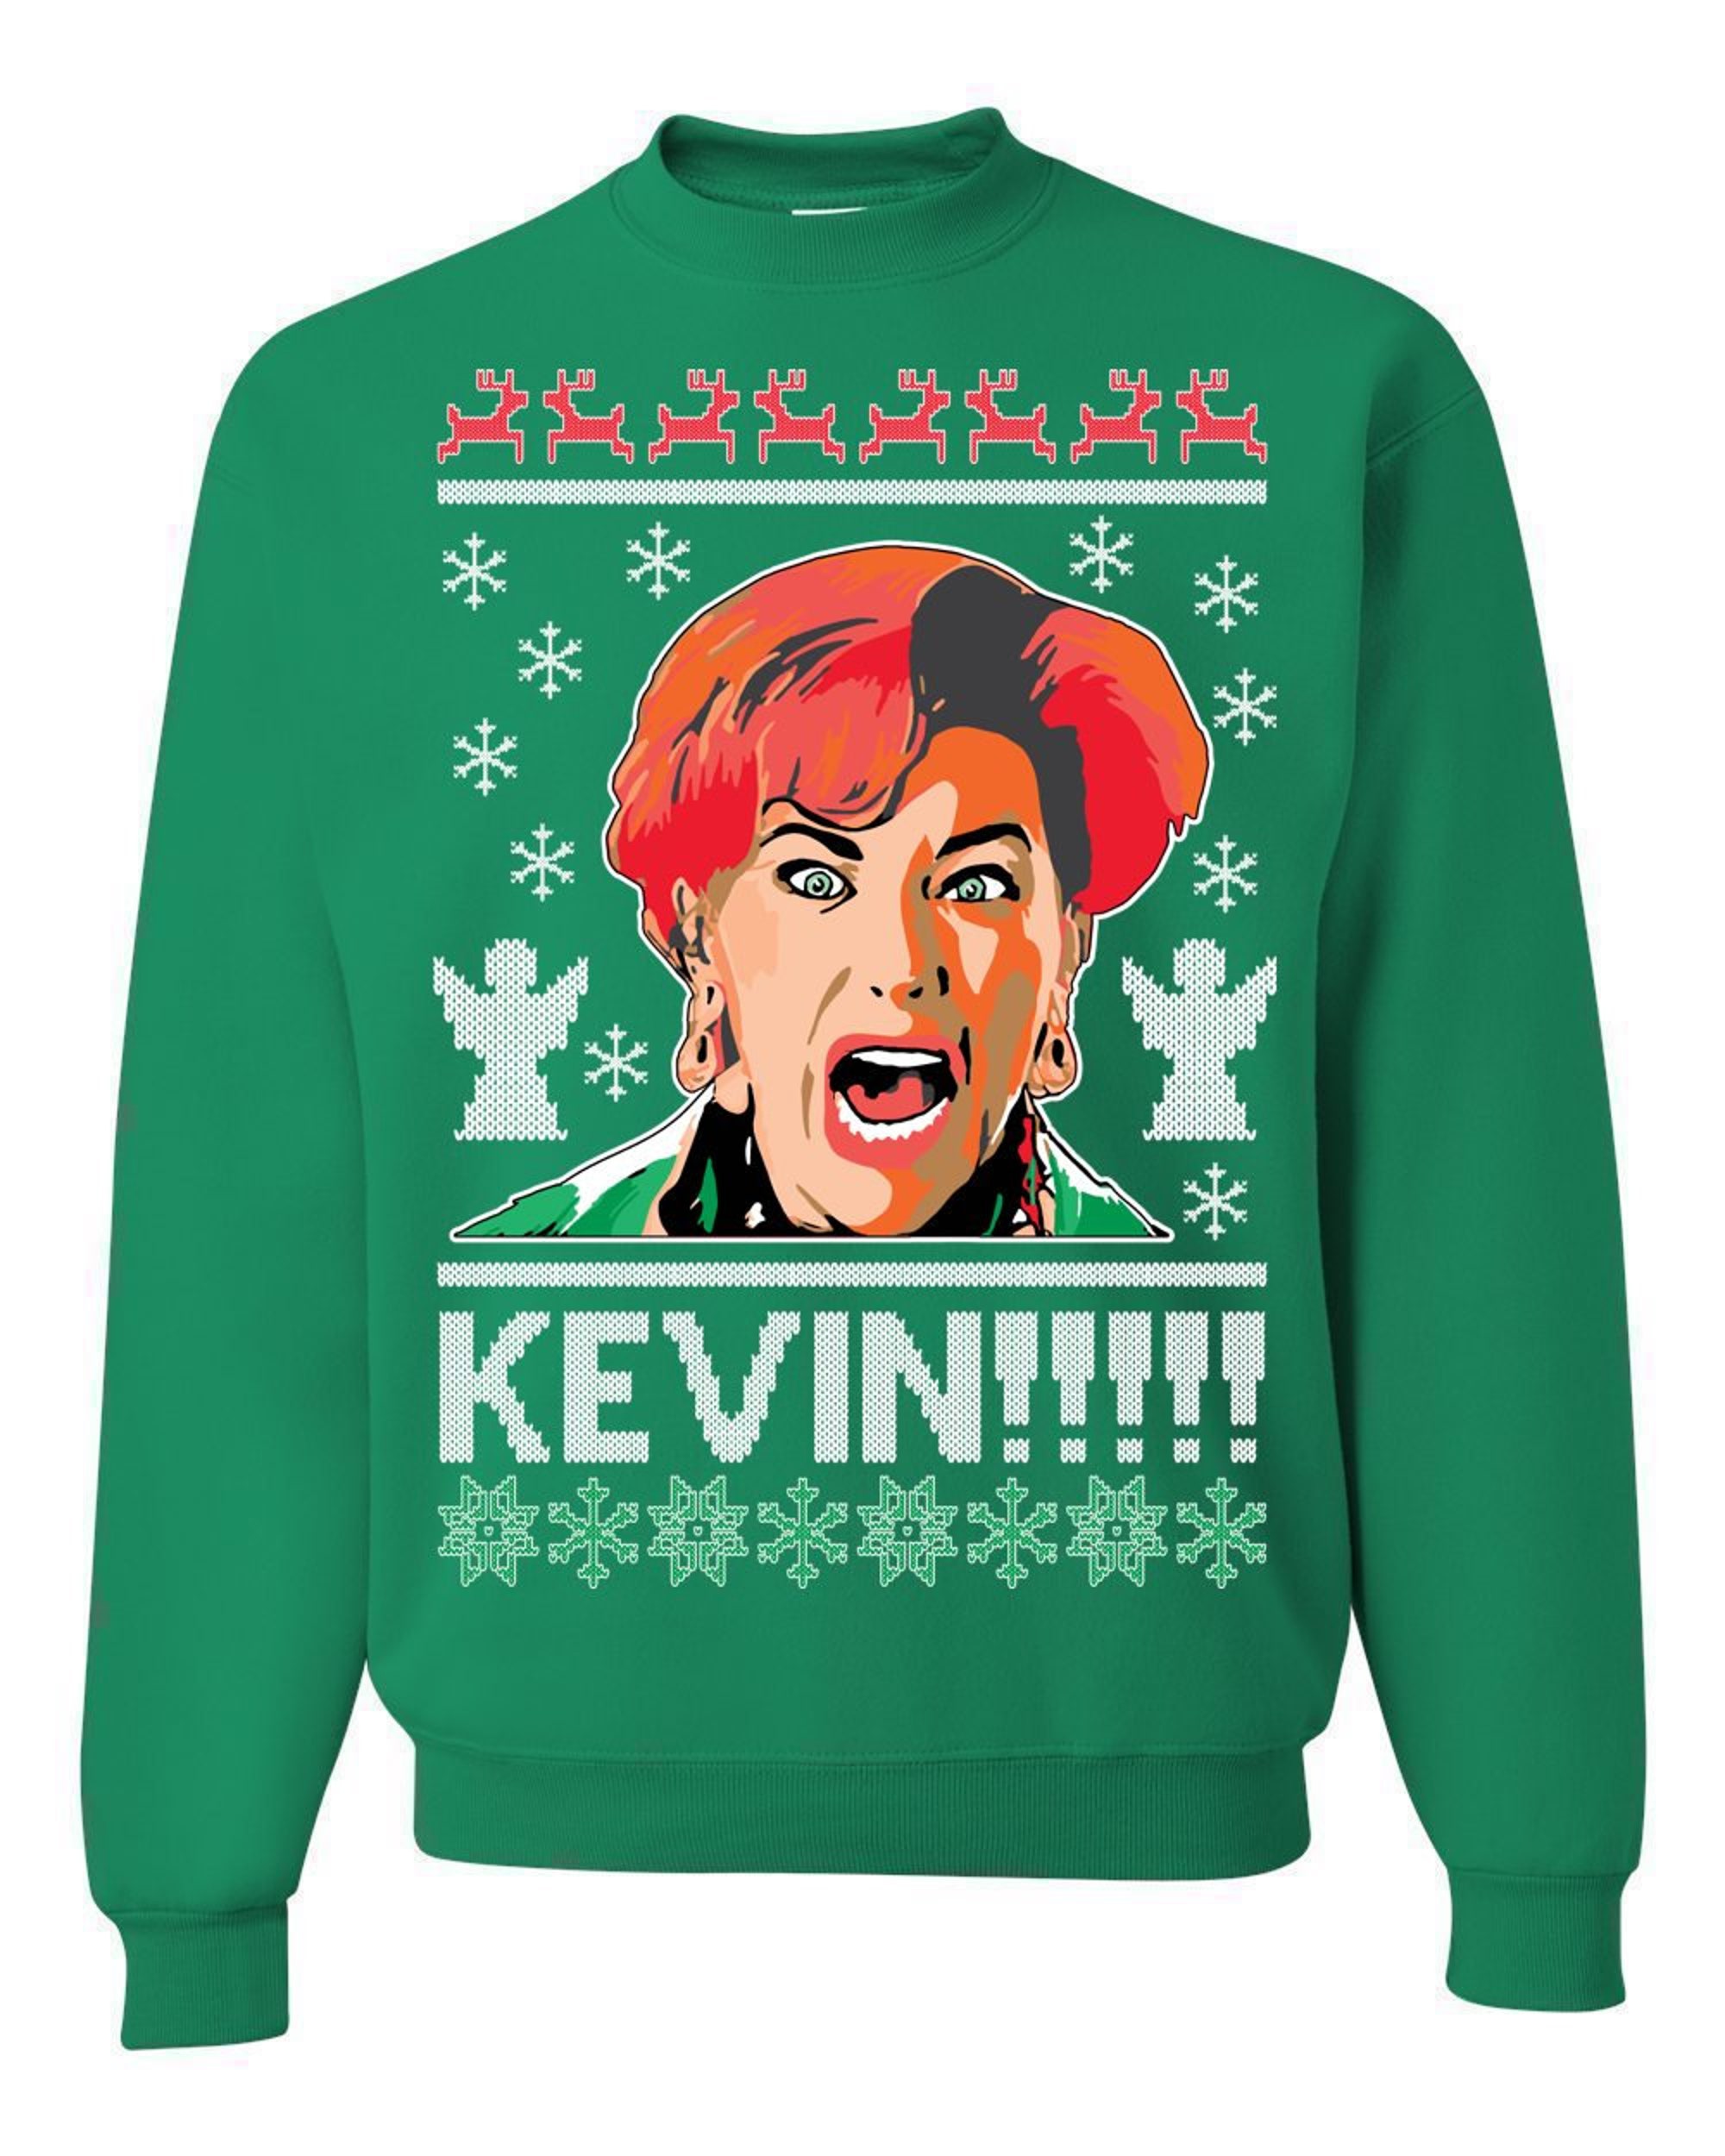 Discover Ugly Christmas Sweater Home Alone Kevin! Unisex Sweatshirt